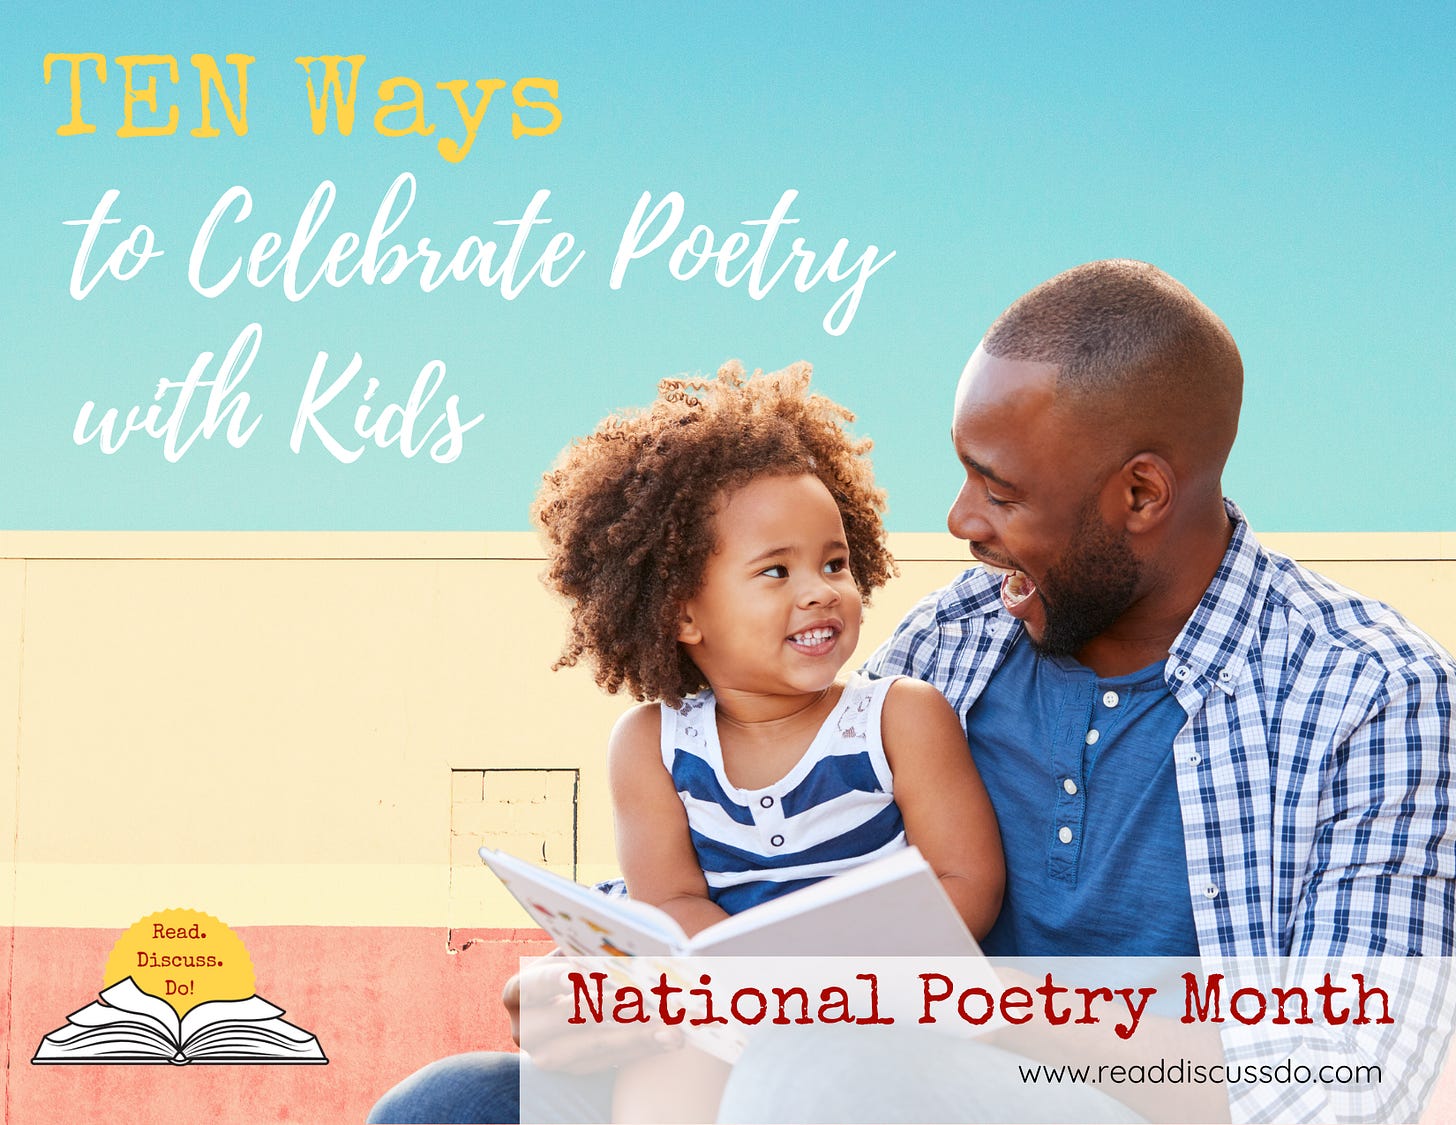 Image shows father and small child reading a book together. The image says "ten ways to celebrate poetry with kids"